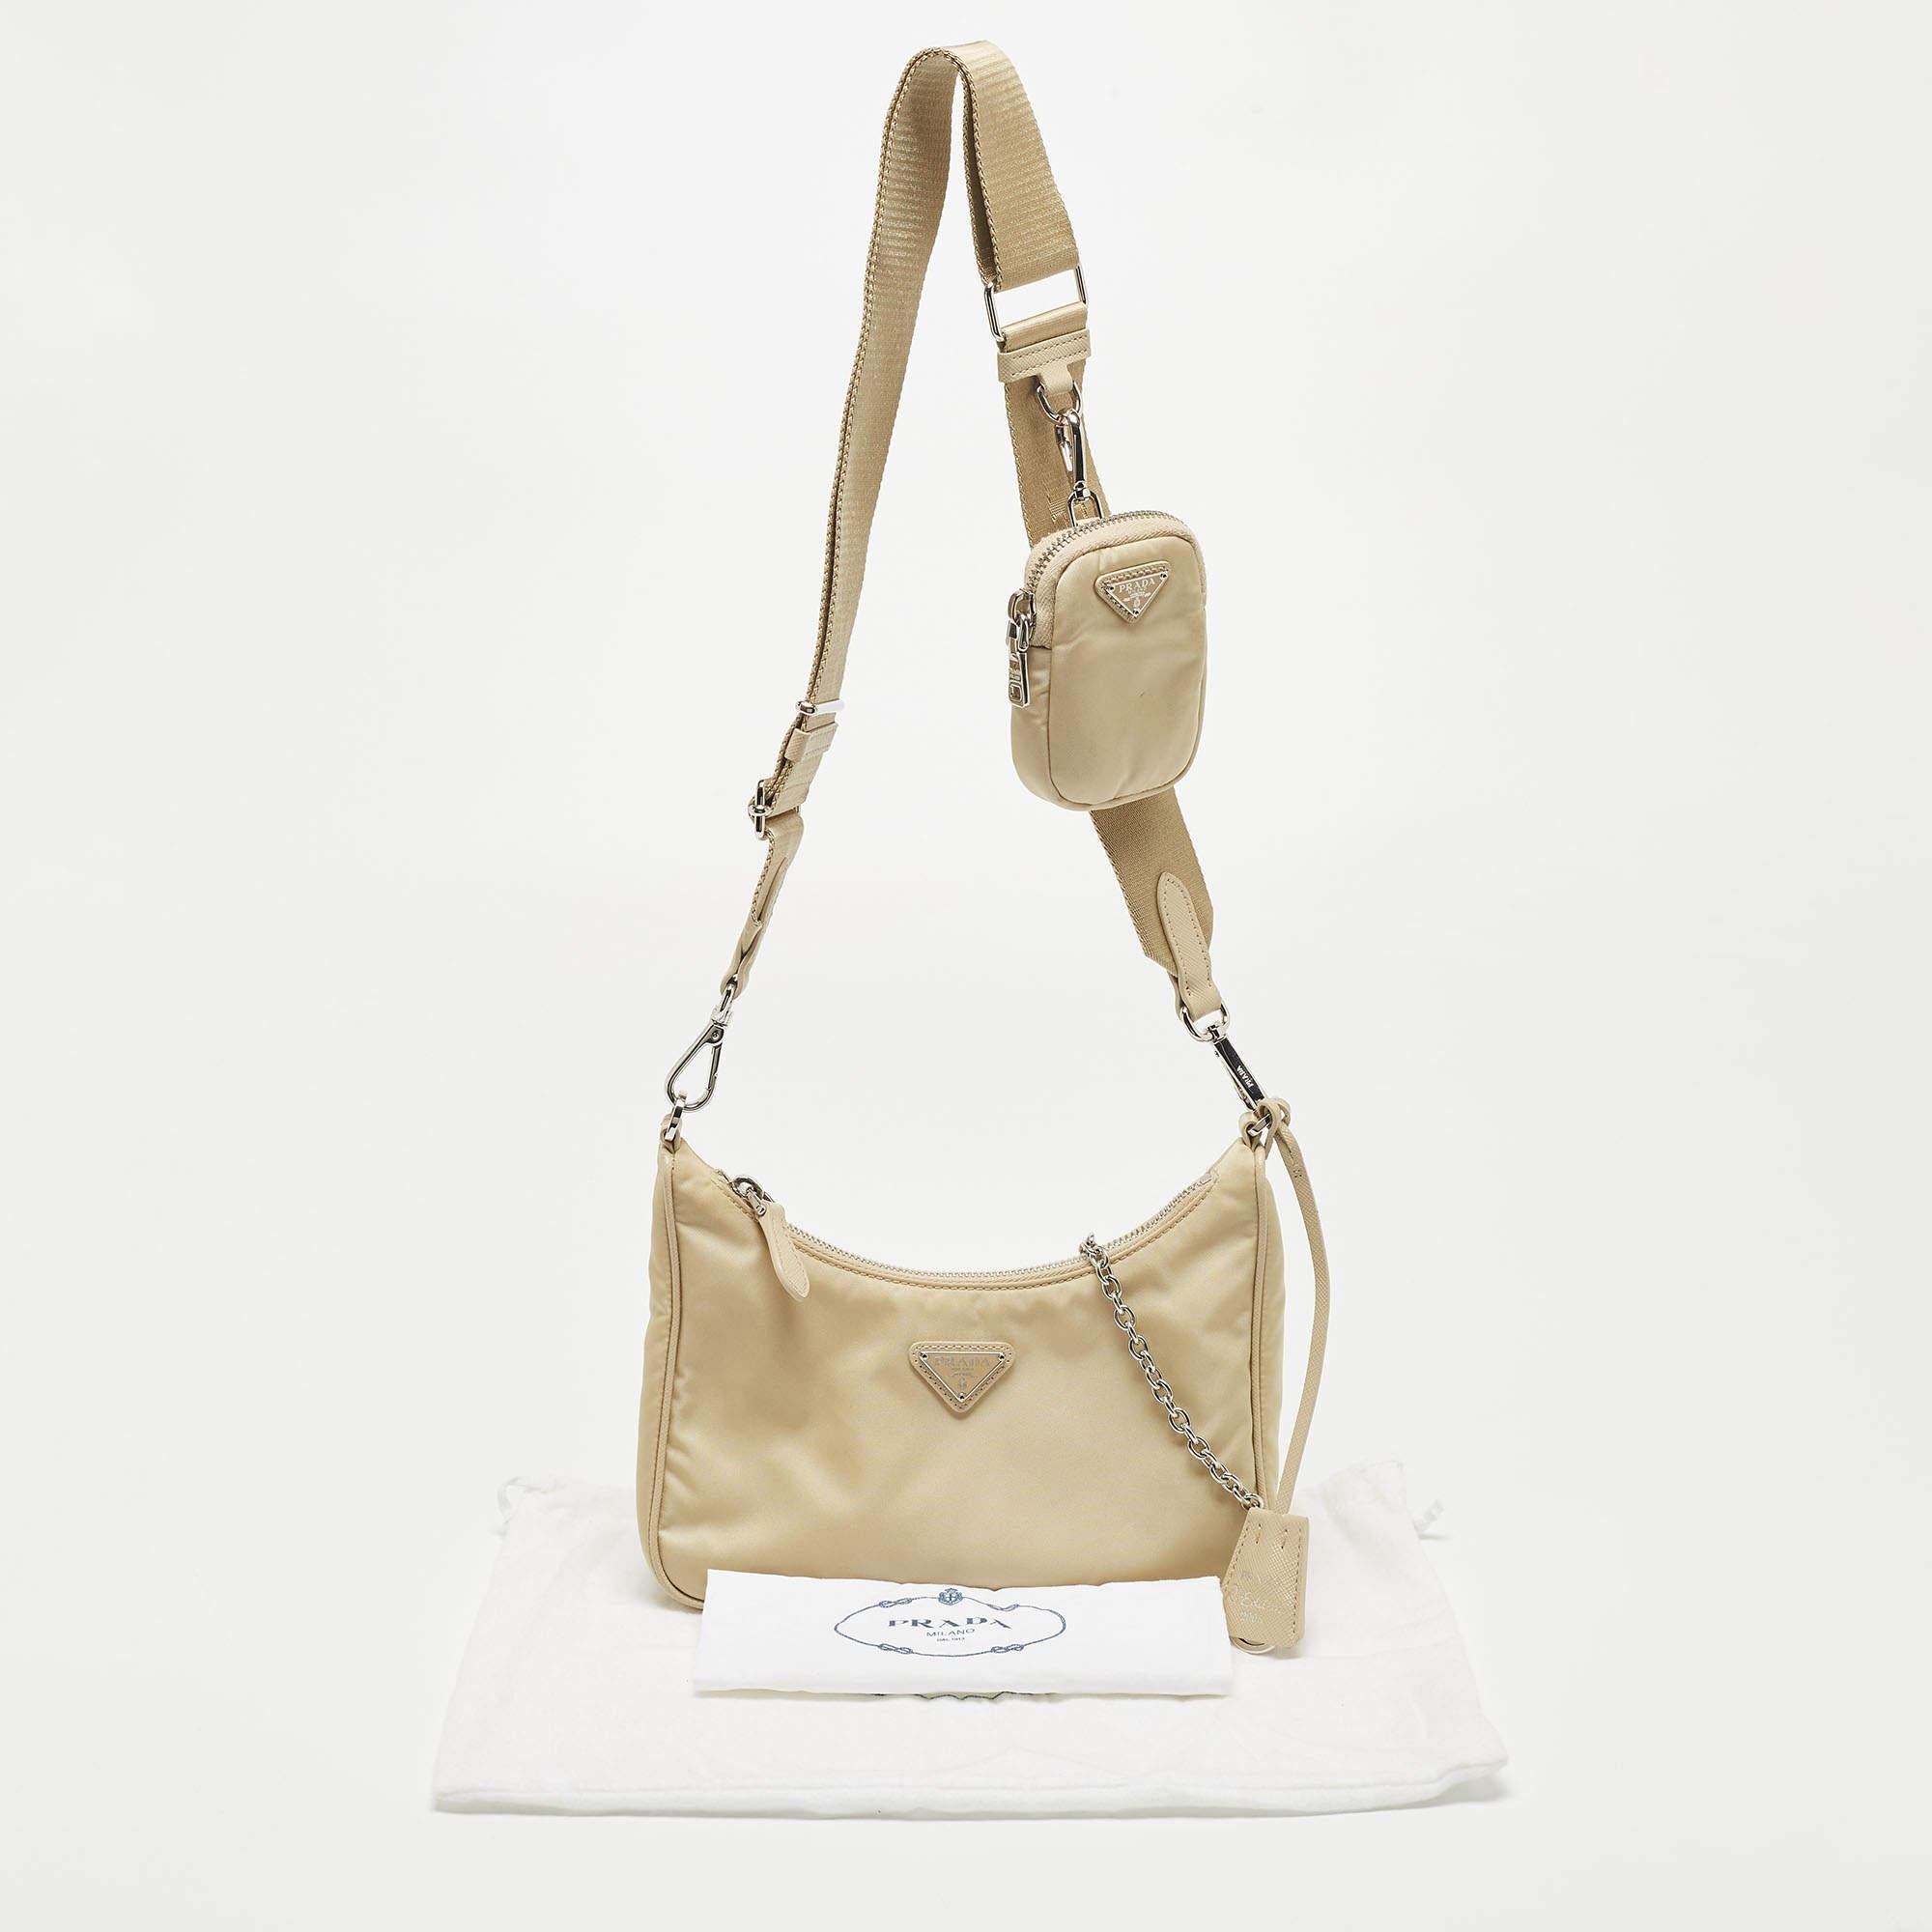 Prada Beige Nylon and Leather Re-Edition 2005 Baguette Bag 10